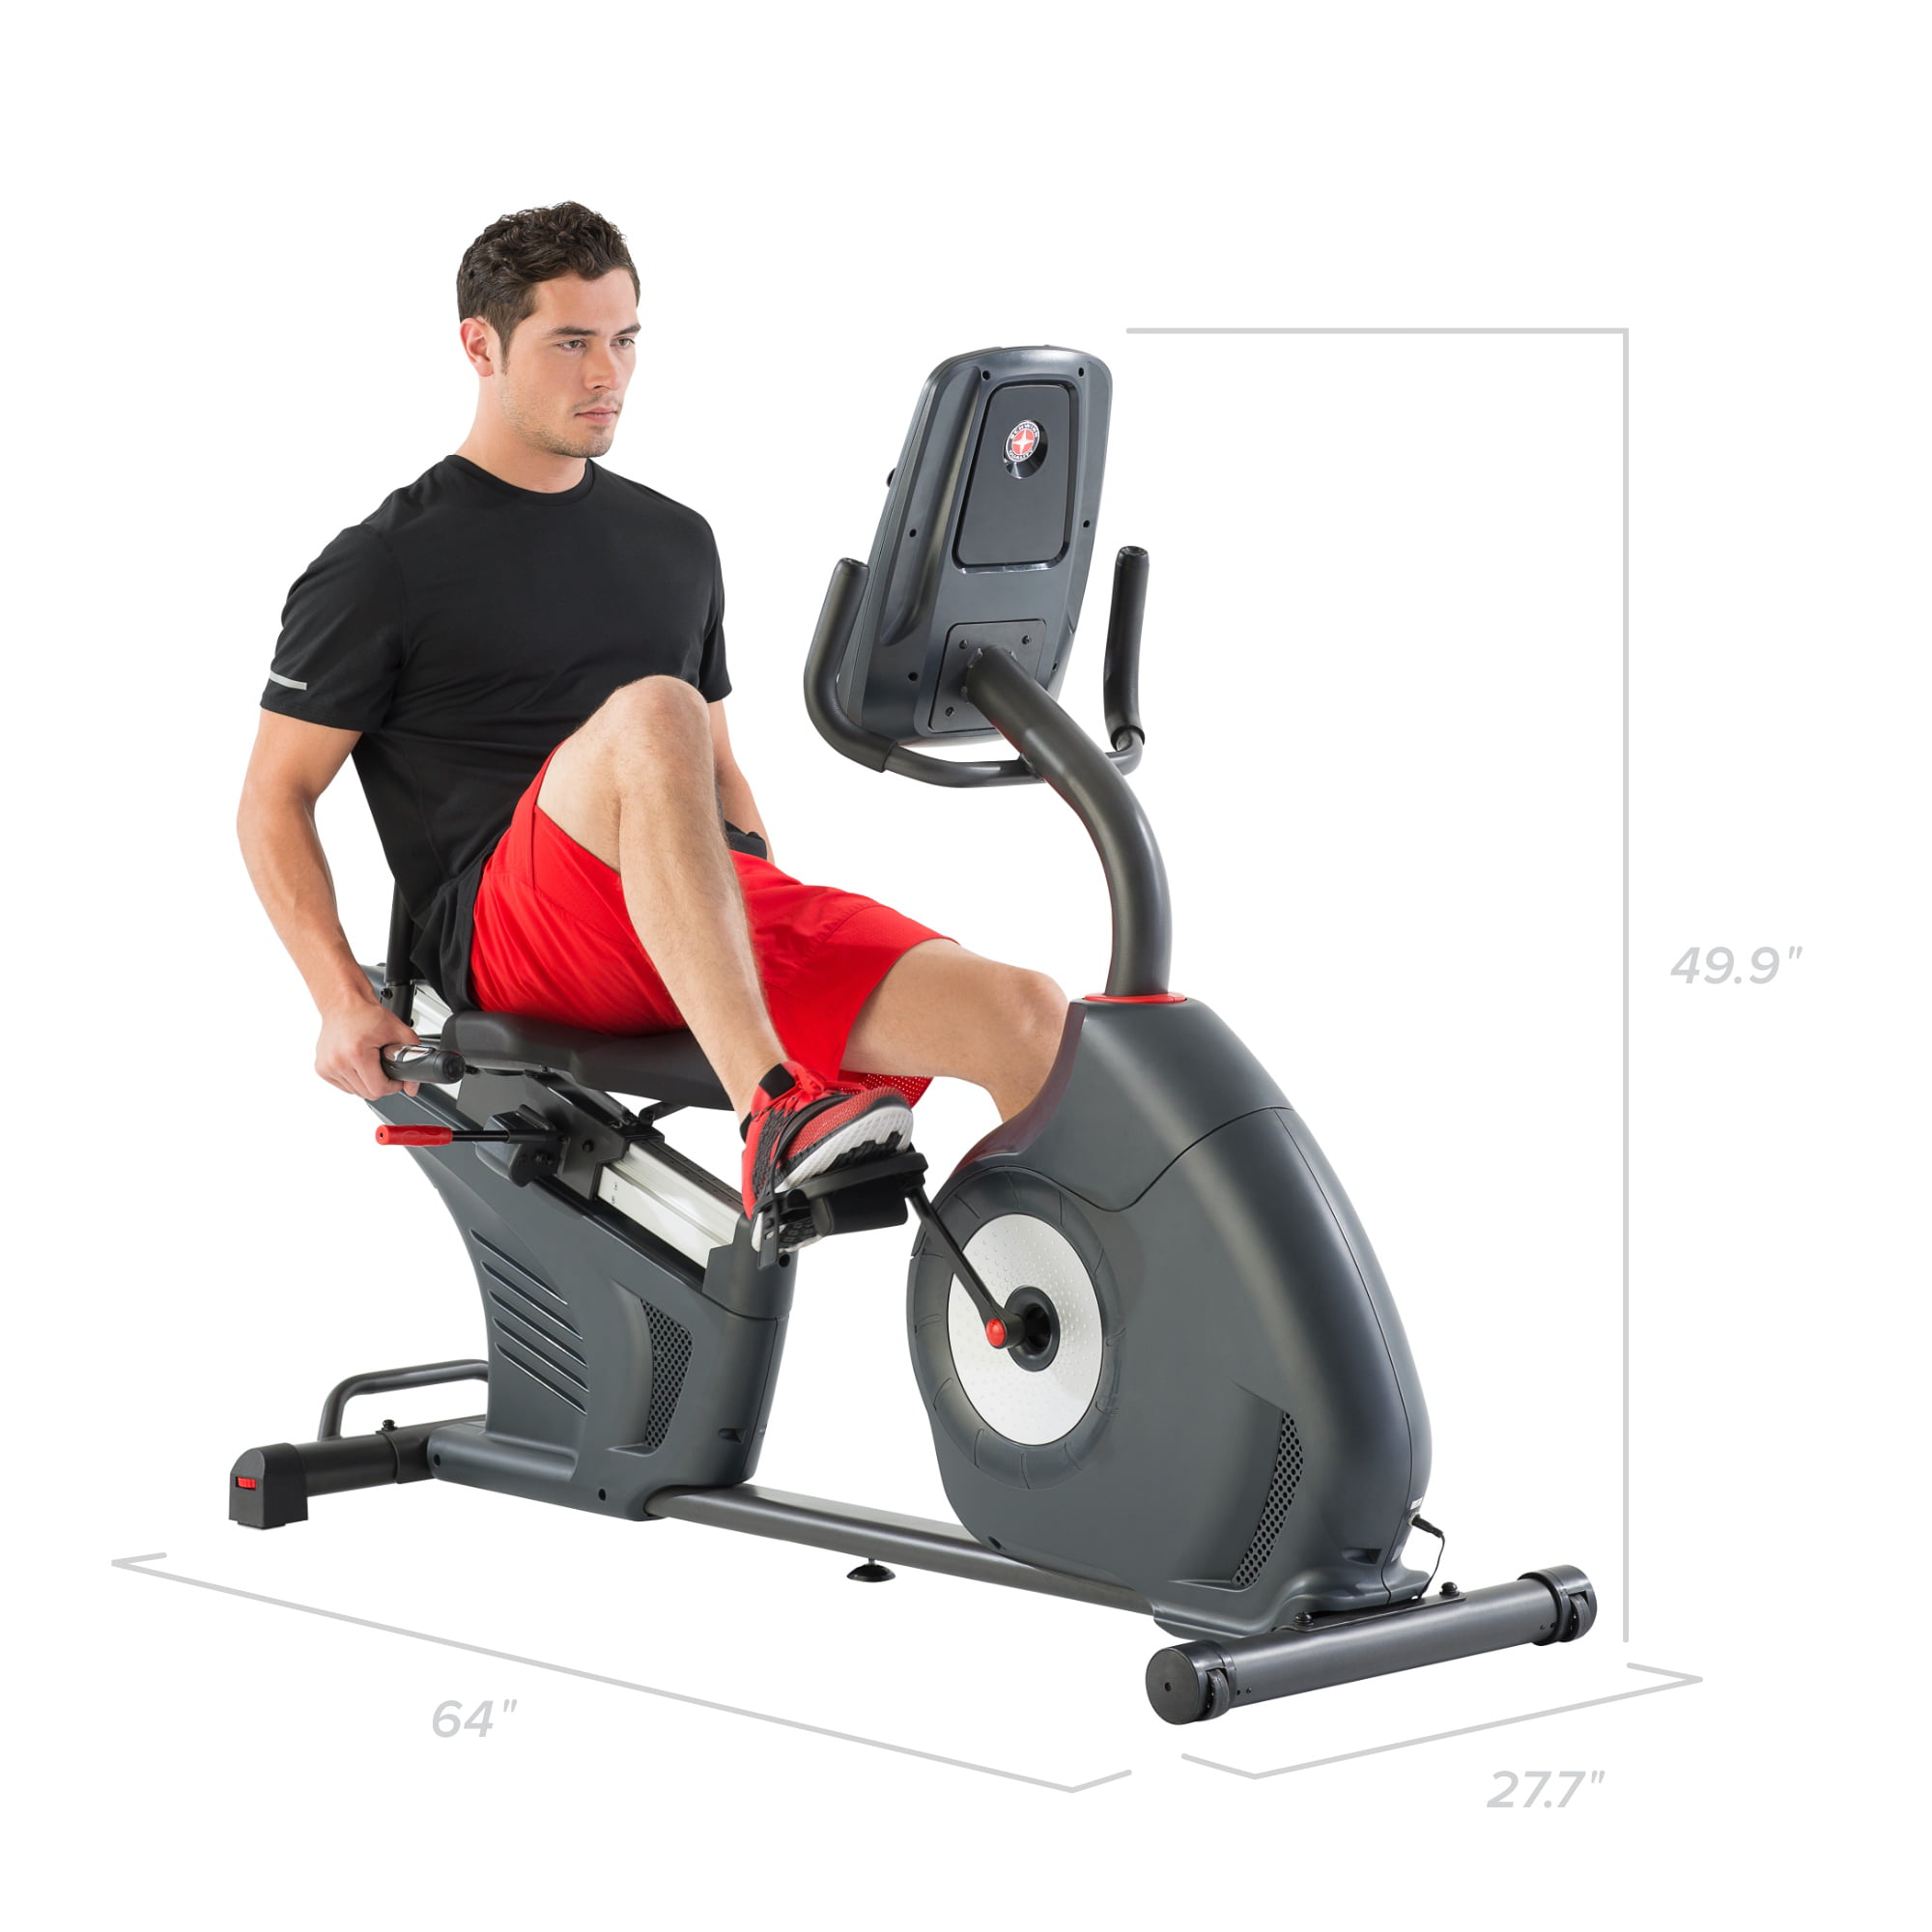 Schwinn 270 Recumbent Exercise Bike with Explore the World Compatibility 